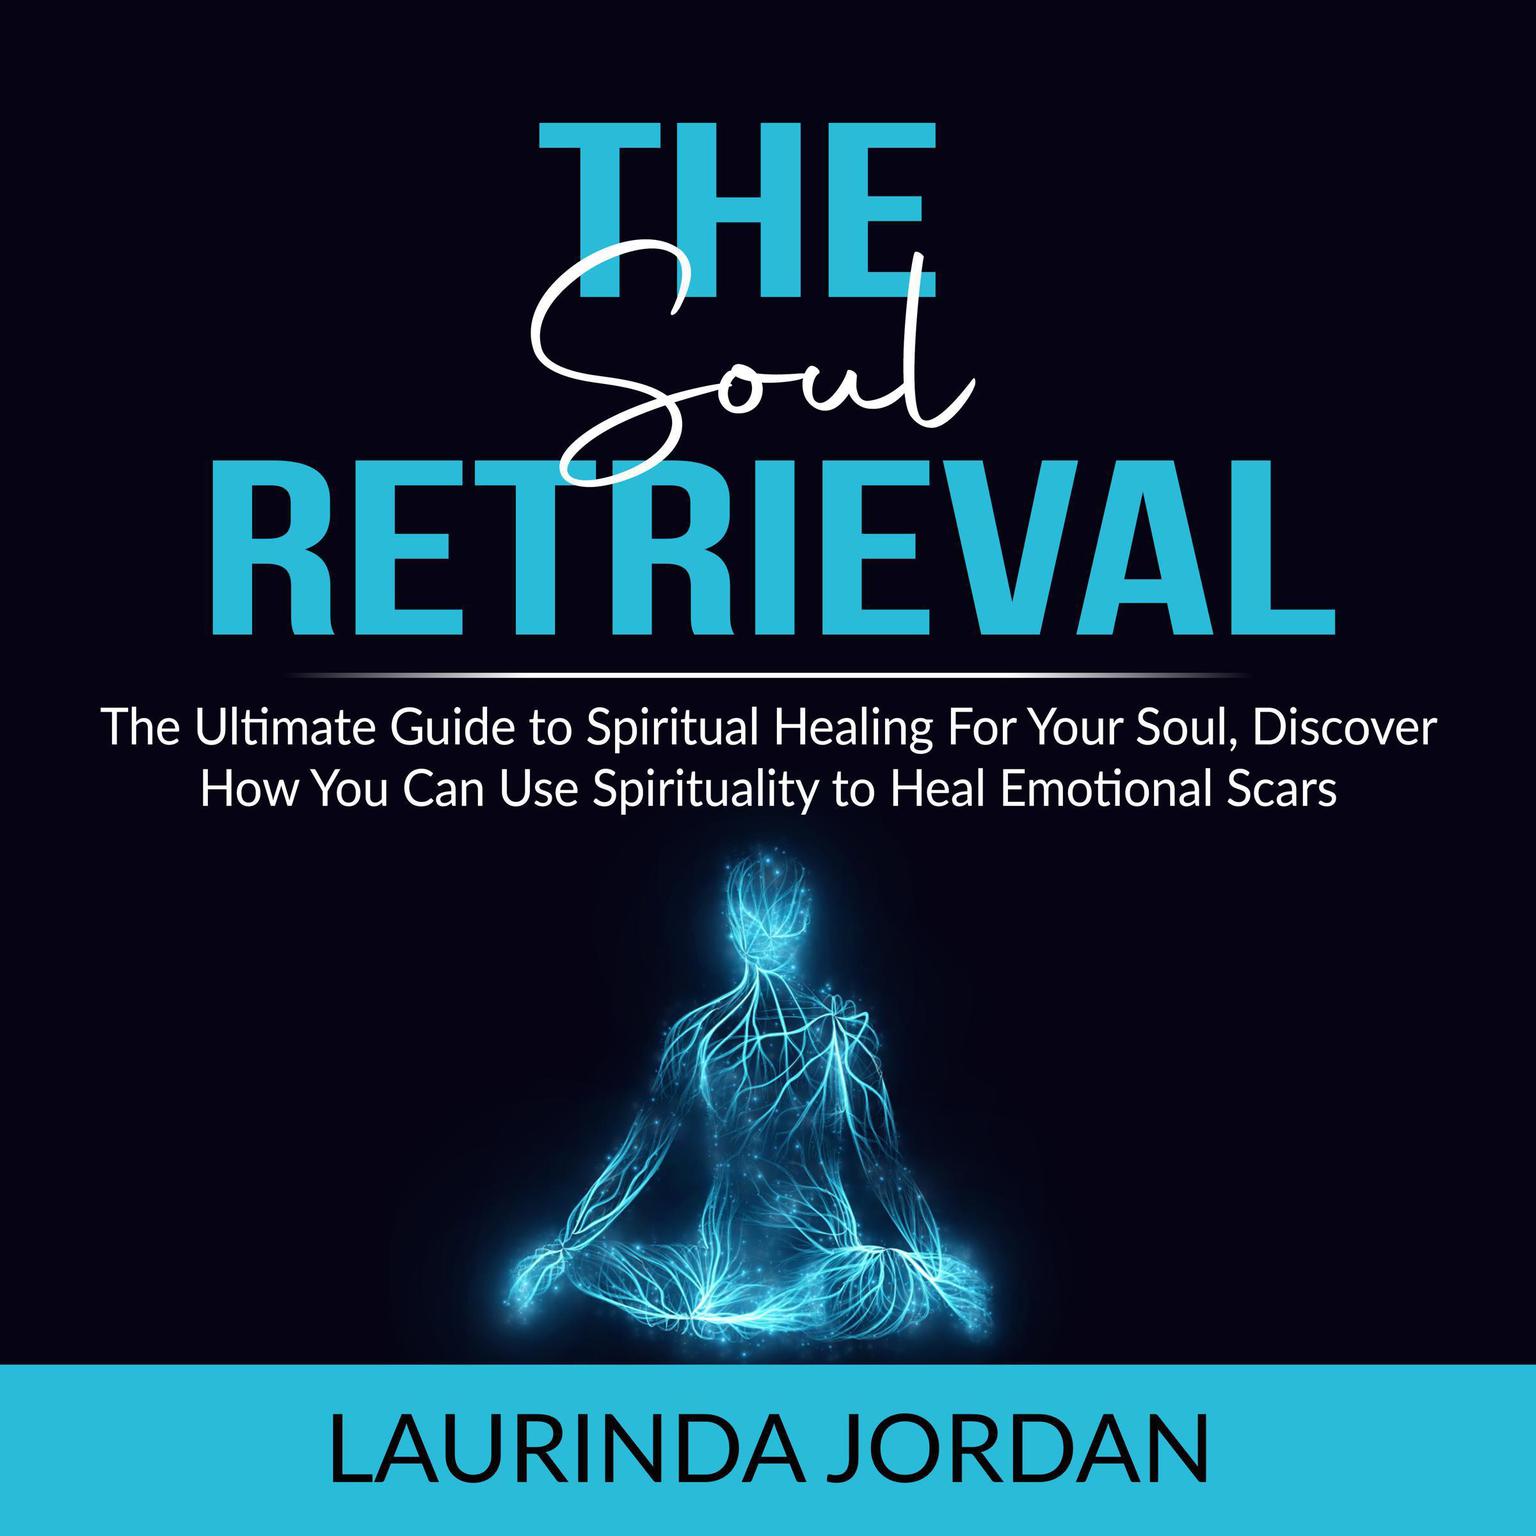 Soul Retrieval: The Ultimate Guide to Spiritual Healing For Your Soul, Discover How You Can Use Spirituality to Heal Emotional Scars  Audiobook, by Laurinda Jordan